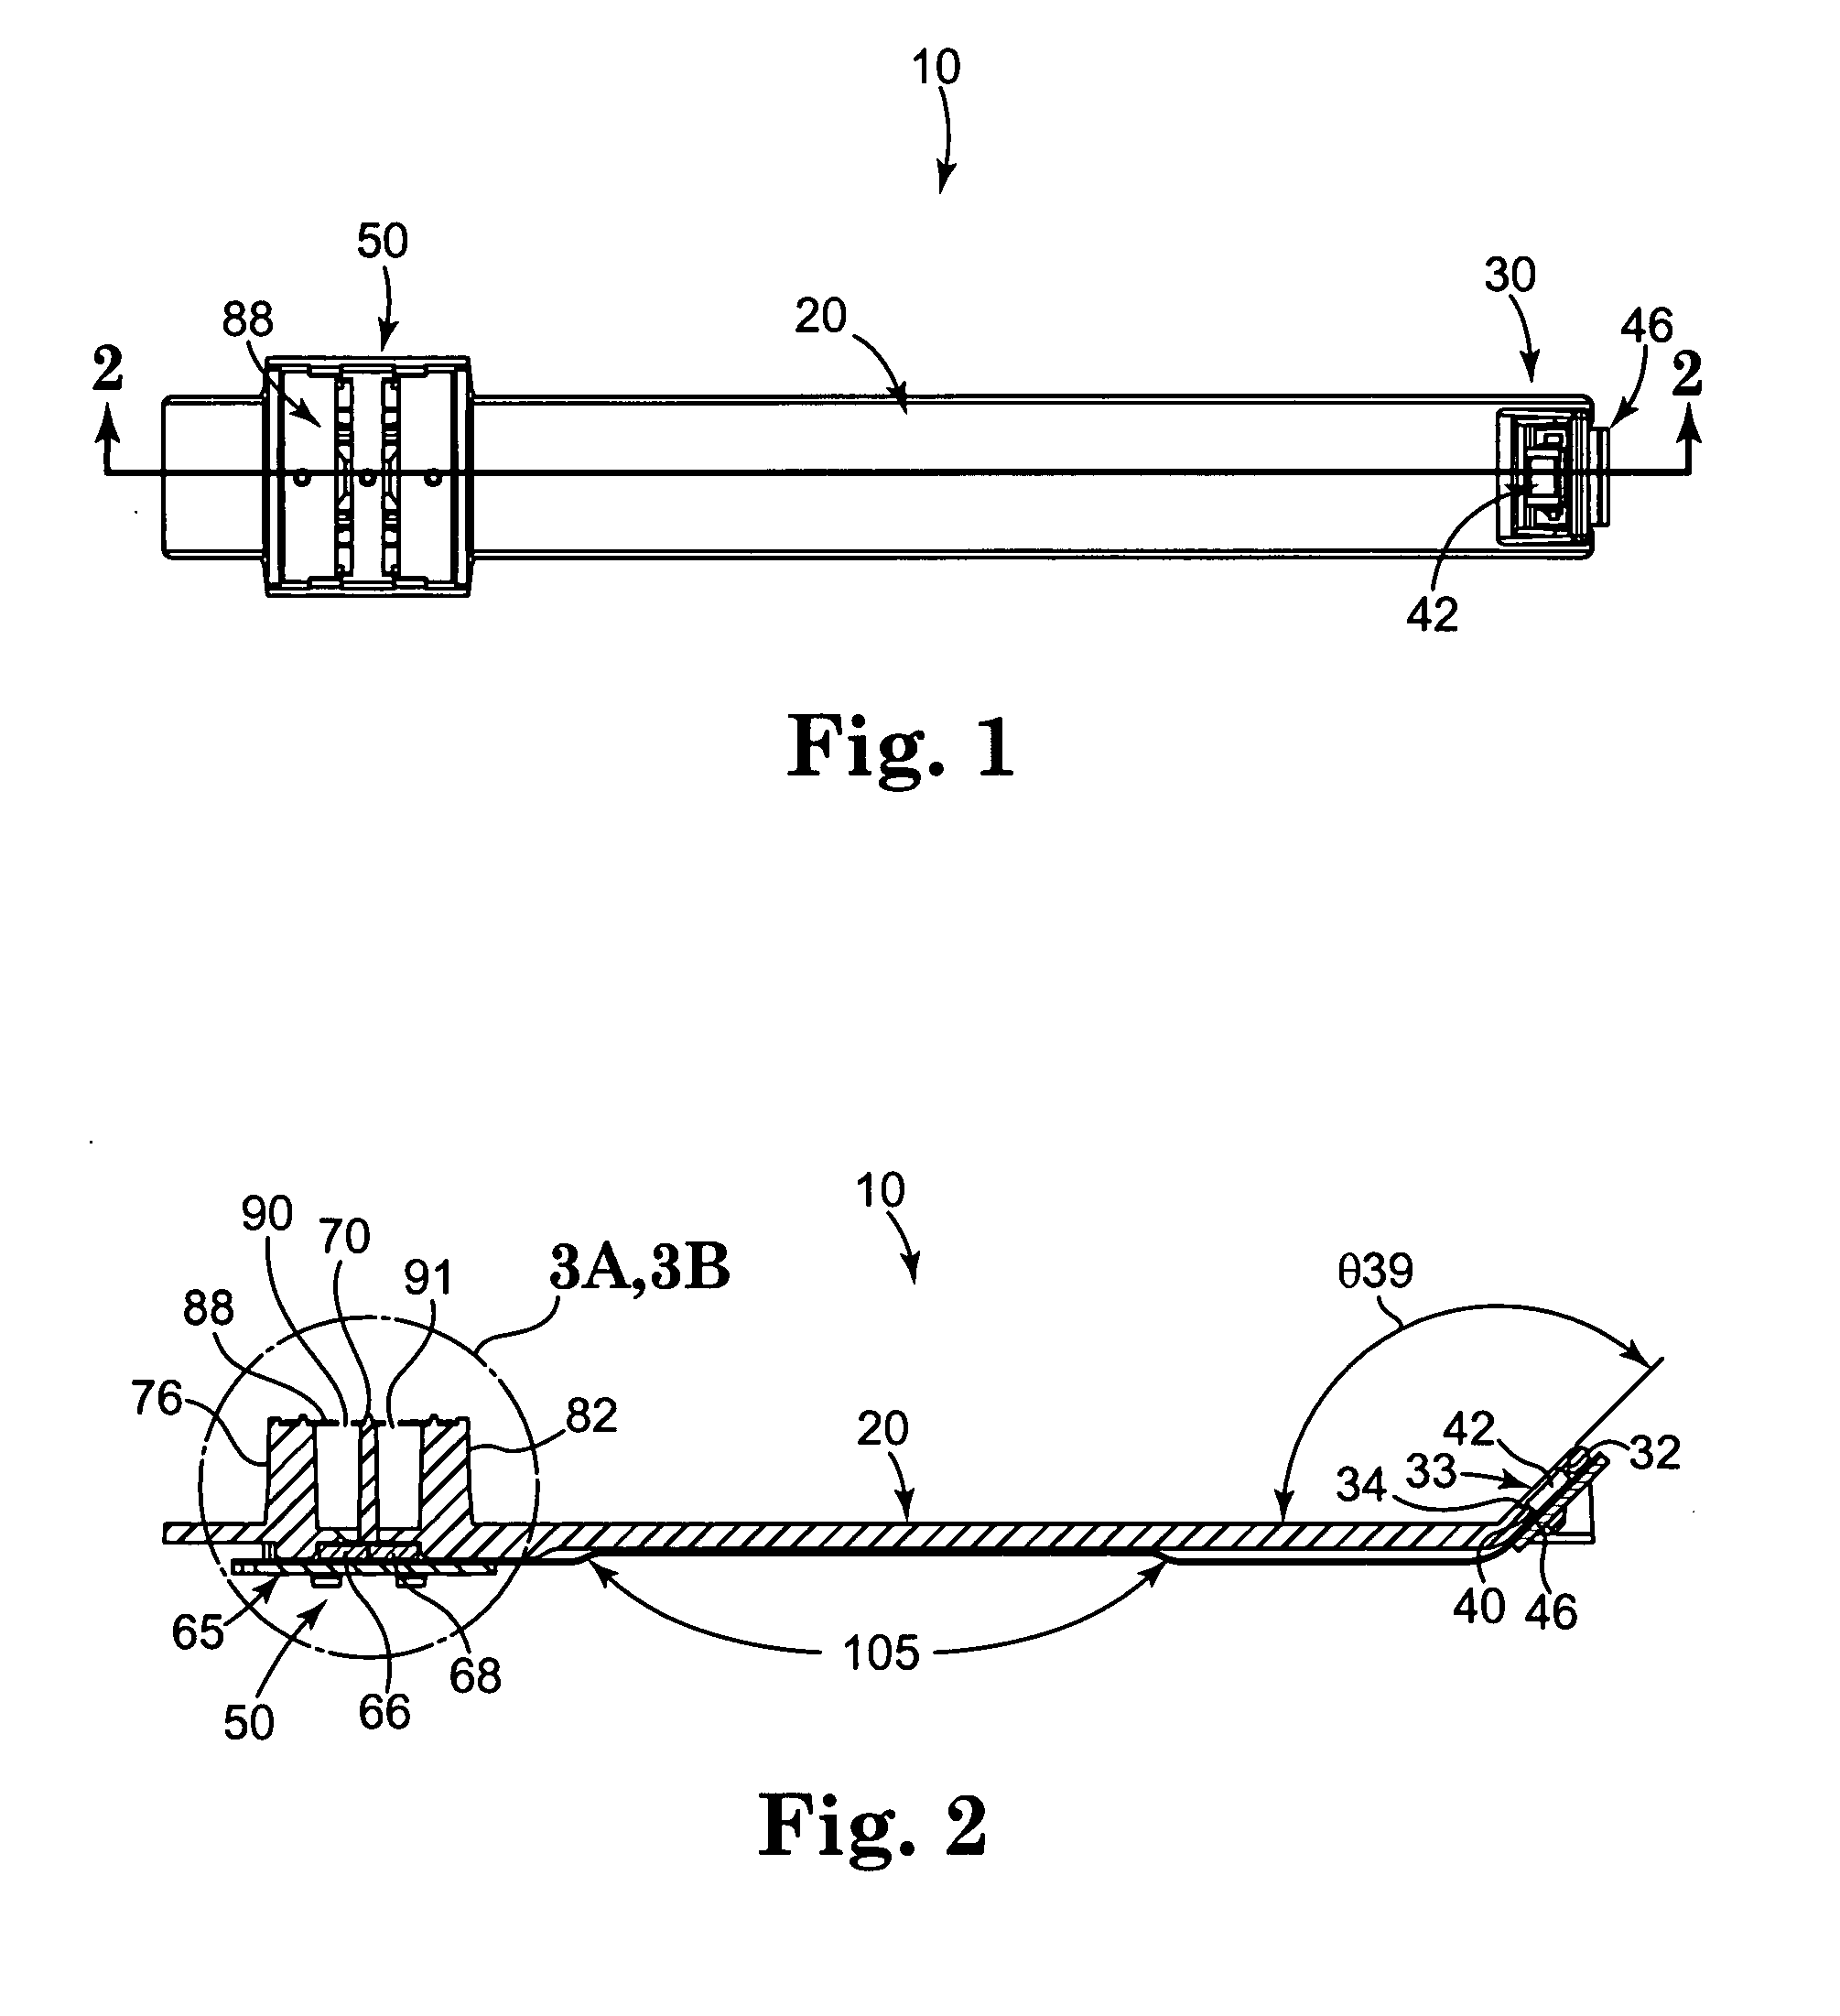 Sun sensor assembly and related method of using